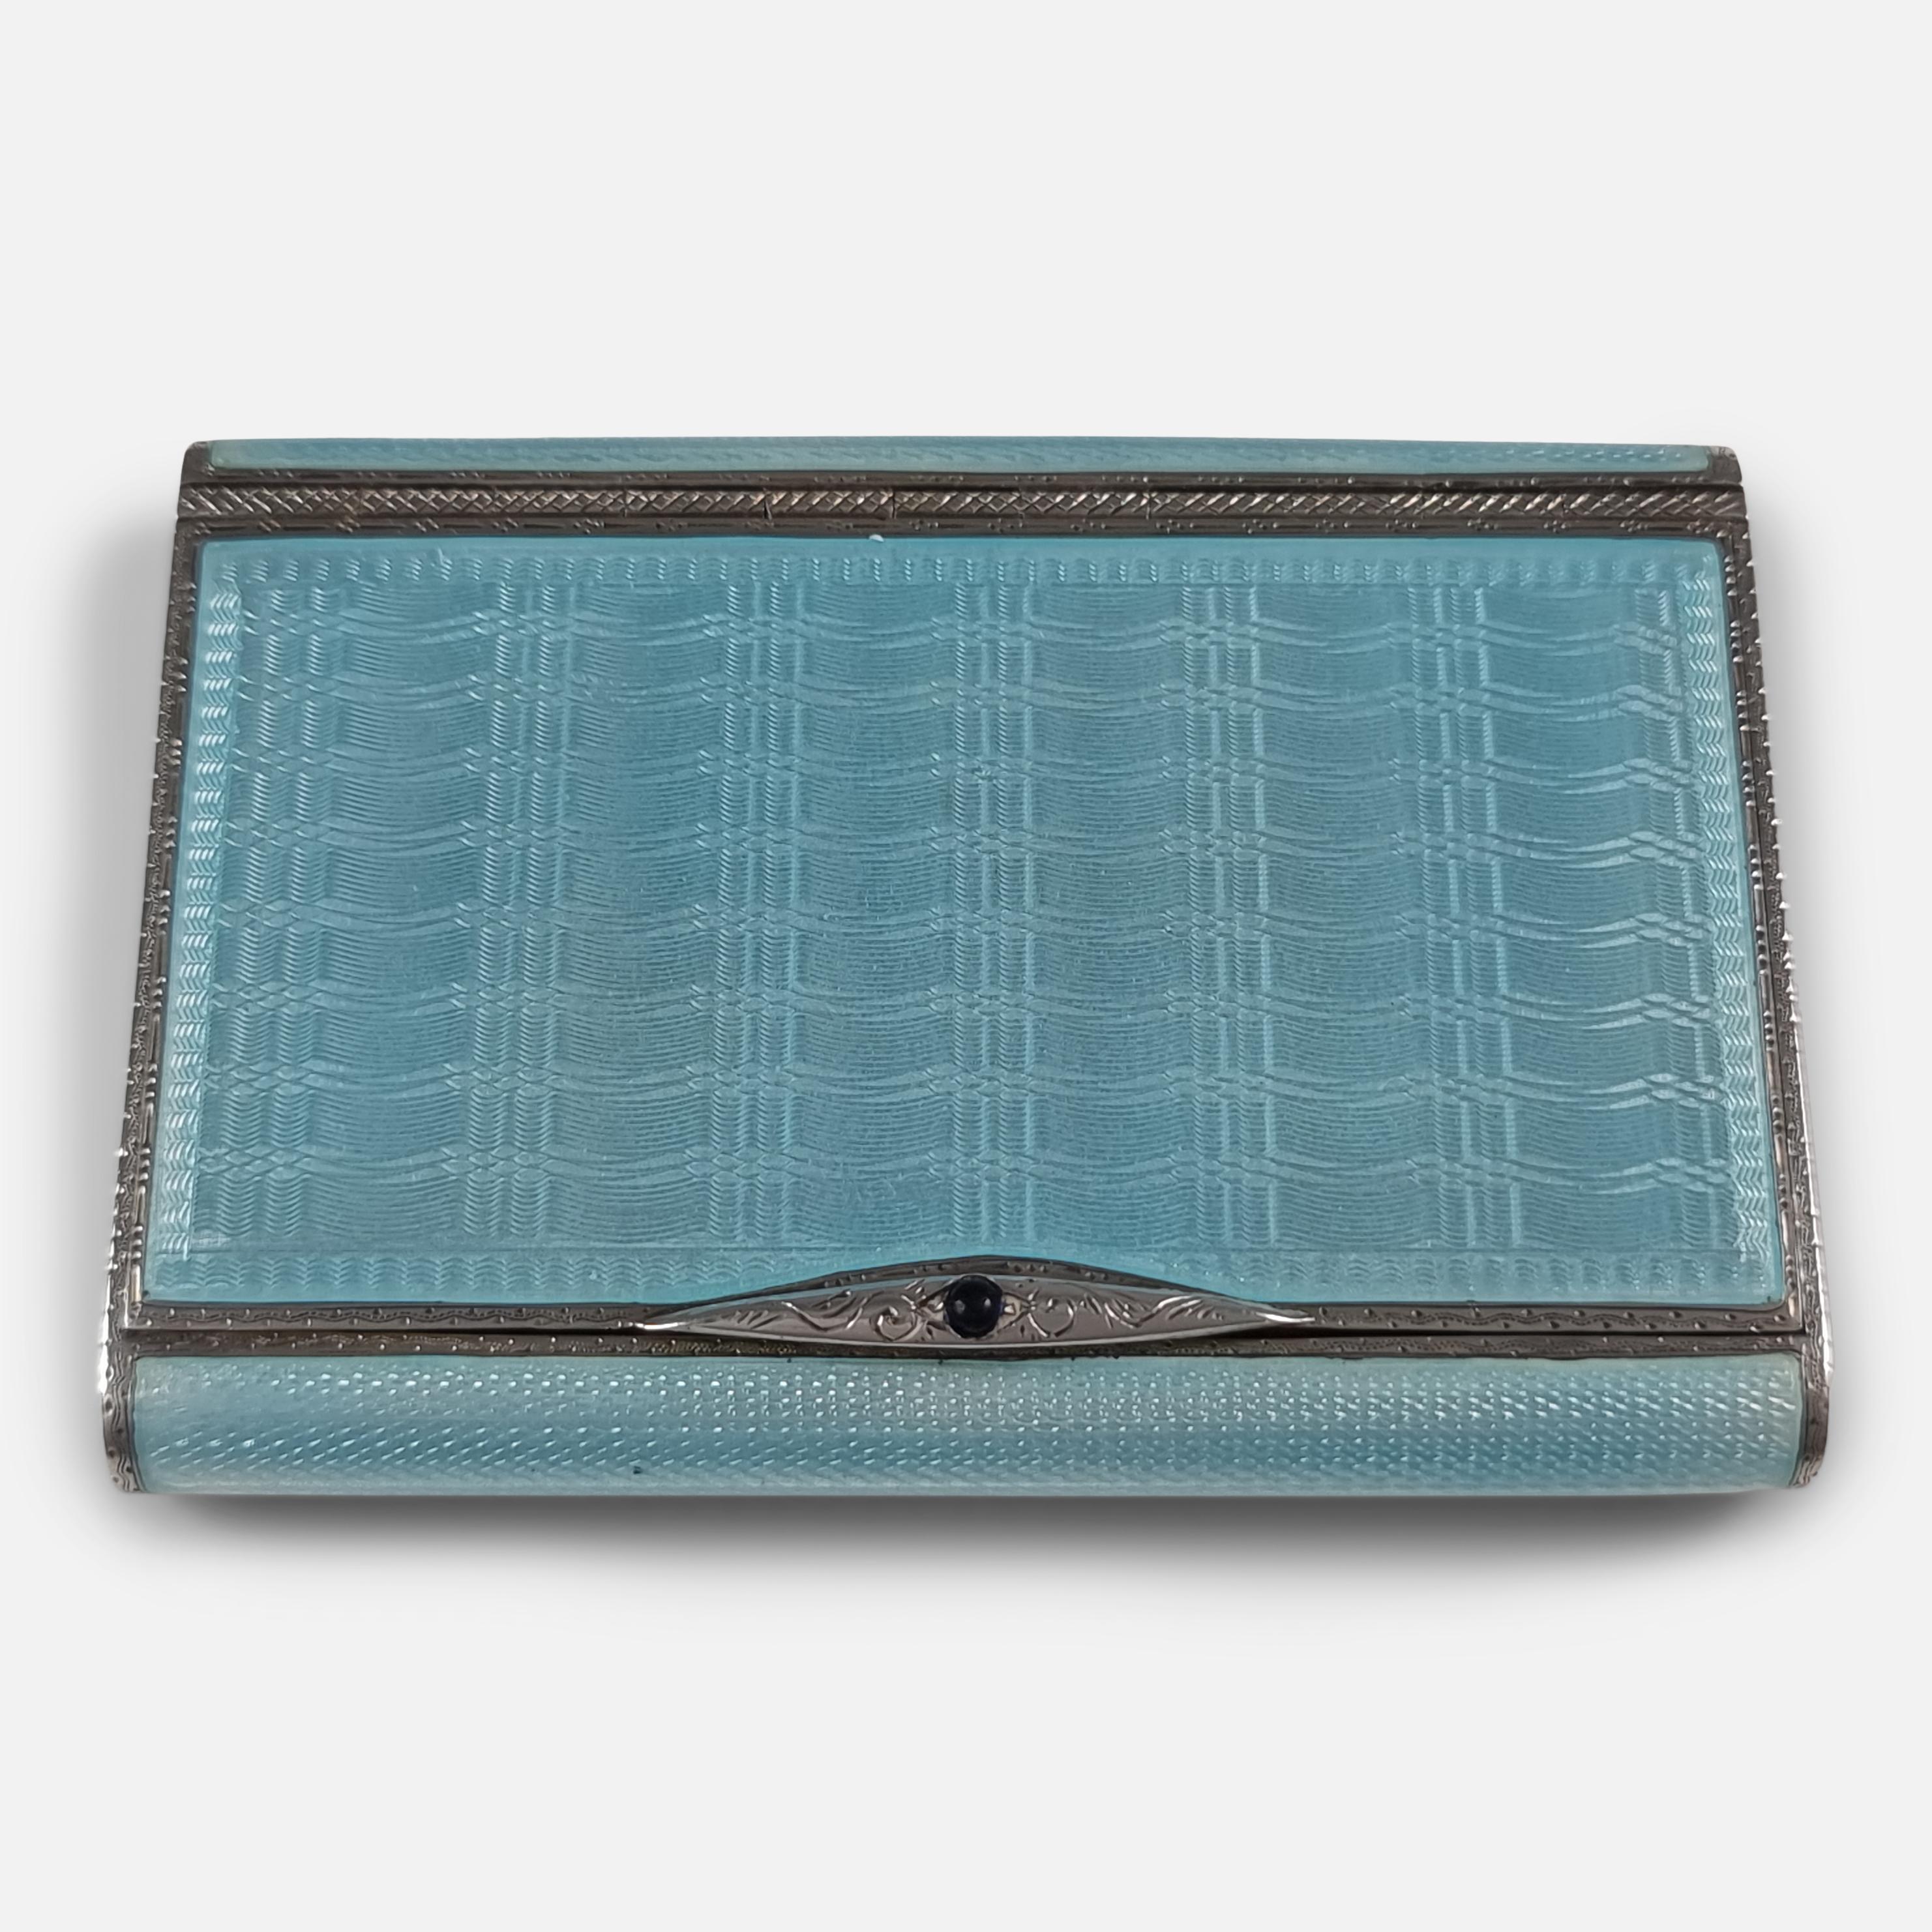 An Art Deco sterling silver and enamel cigarette case. The vintage silver cigarette case is of rectangular form, with light blue guilloche enamel decoration, engraved borders, blue cabochon thumbpiece, and hinged lid leading to a gilded